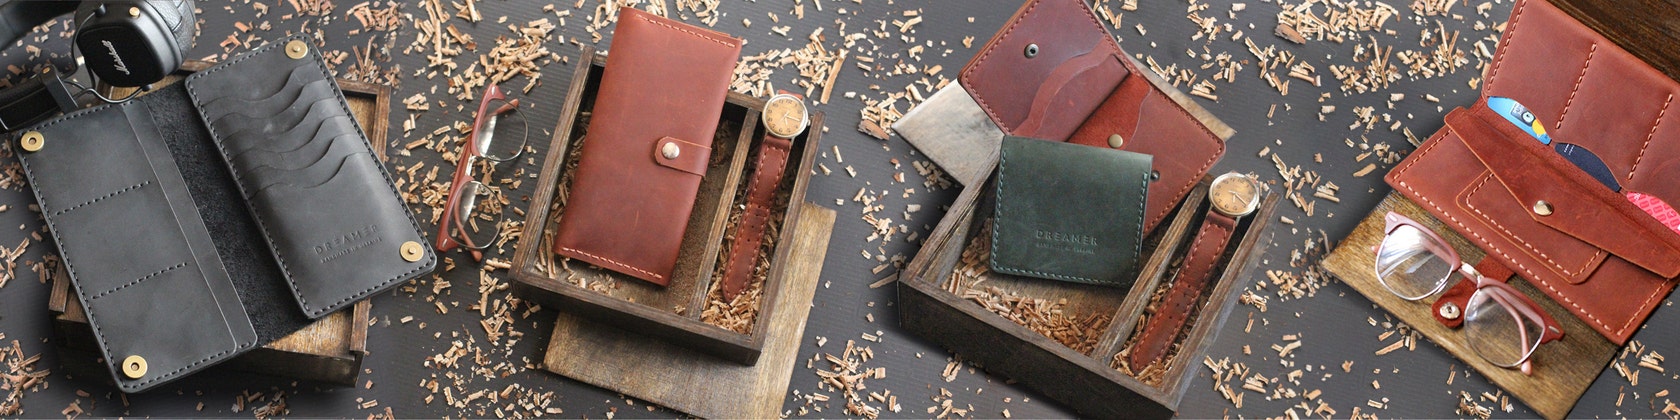 Leather Passport Cover  Walnut – Dreamers Supply Co.